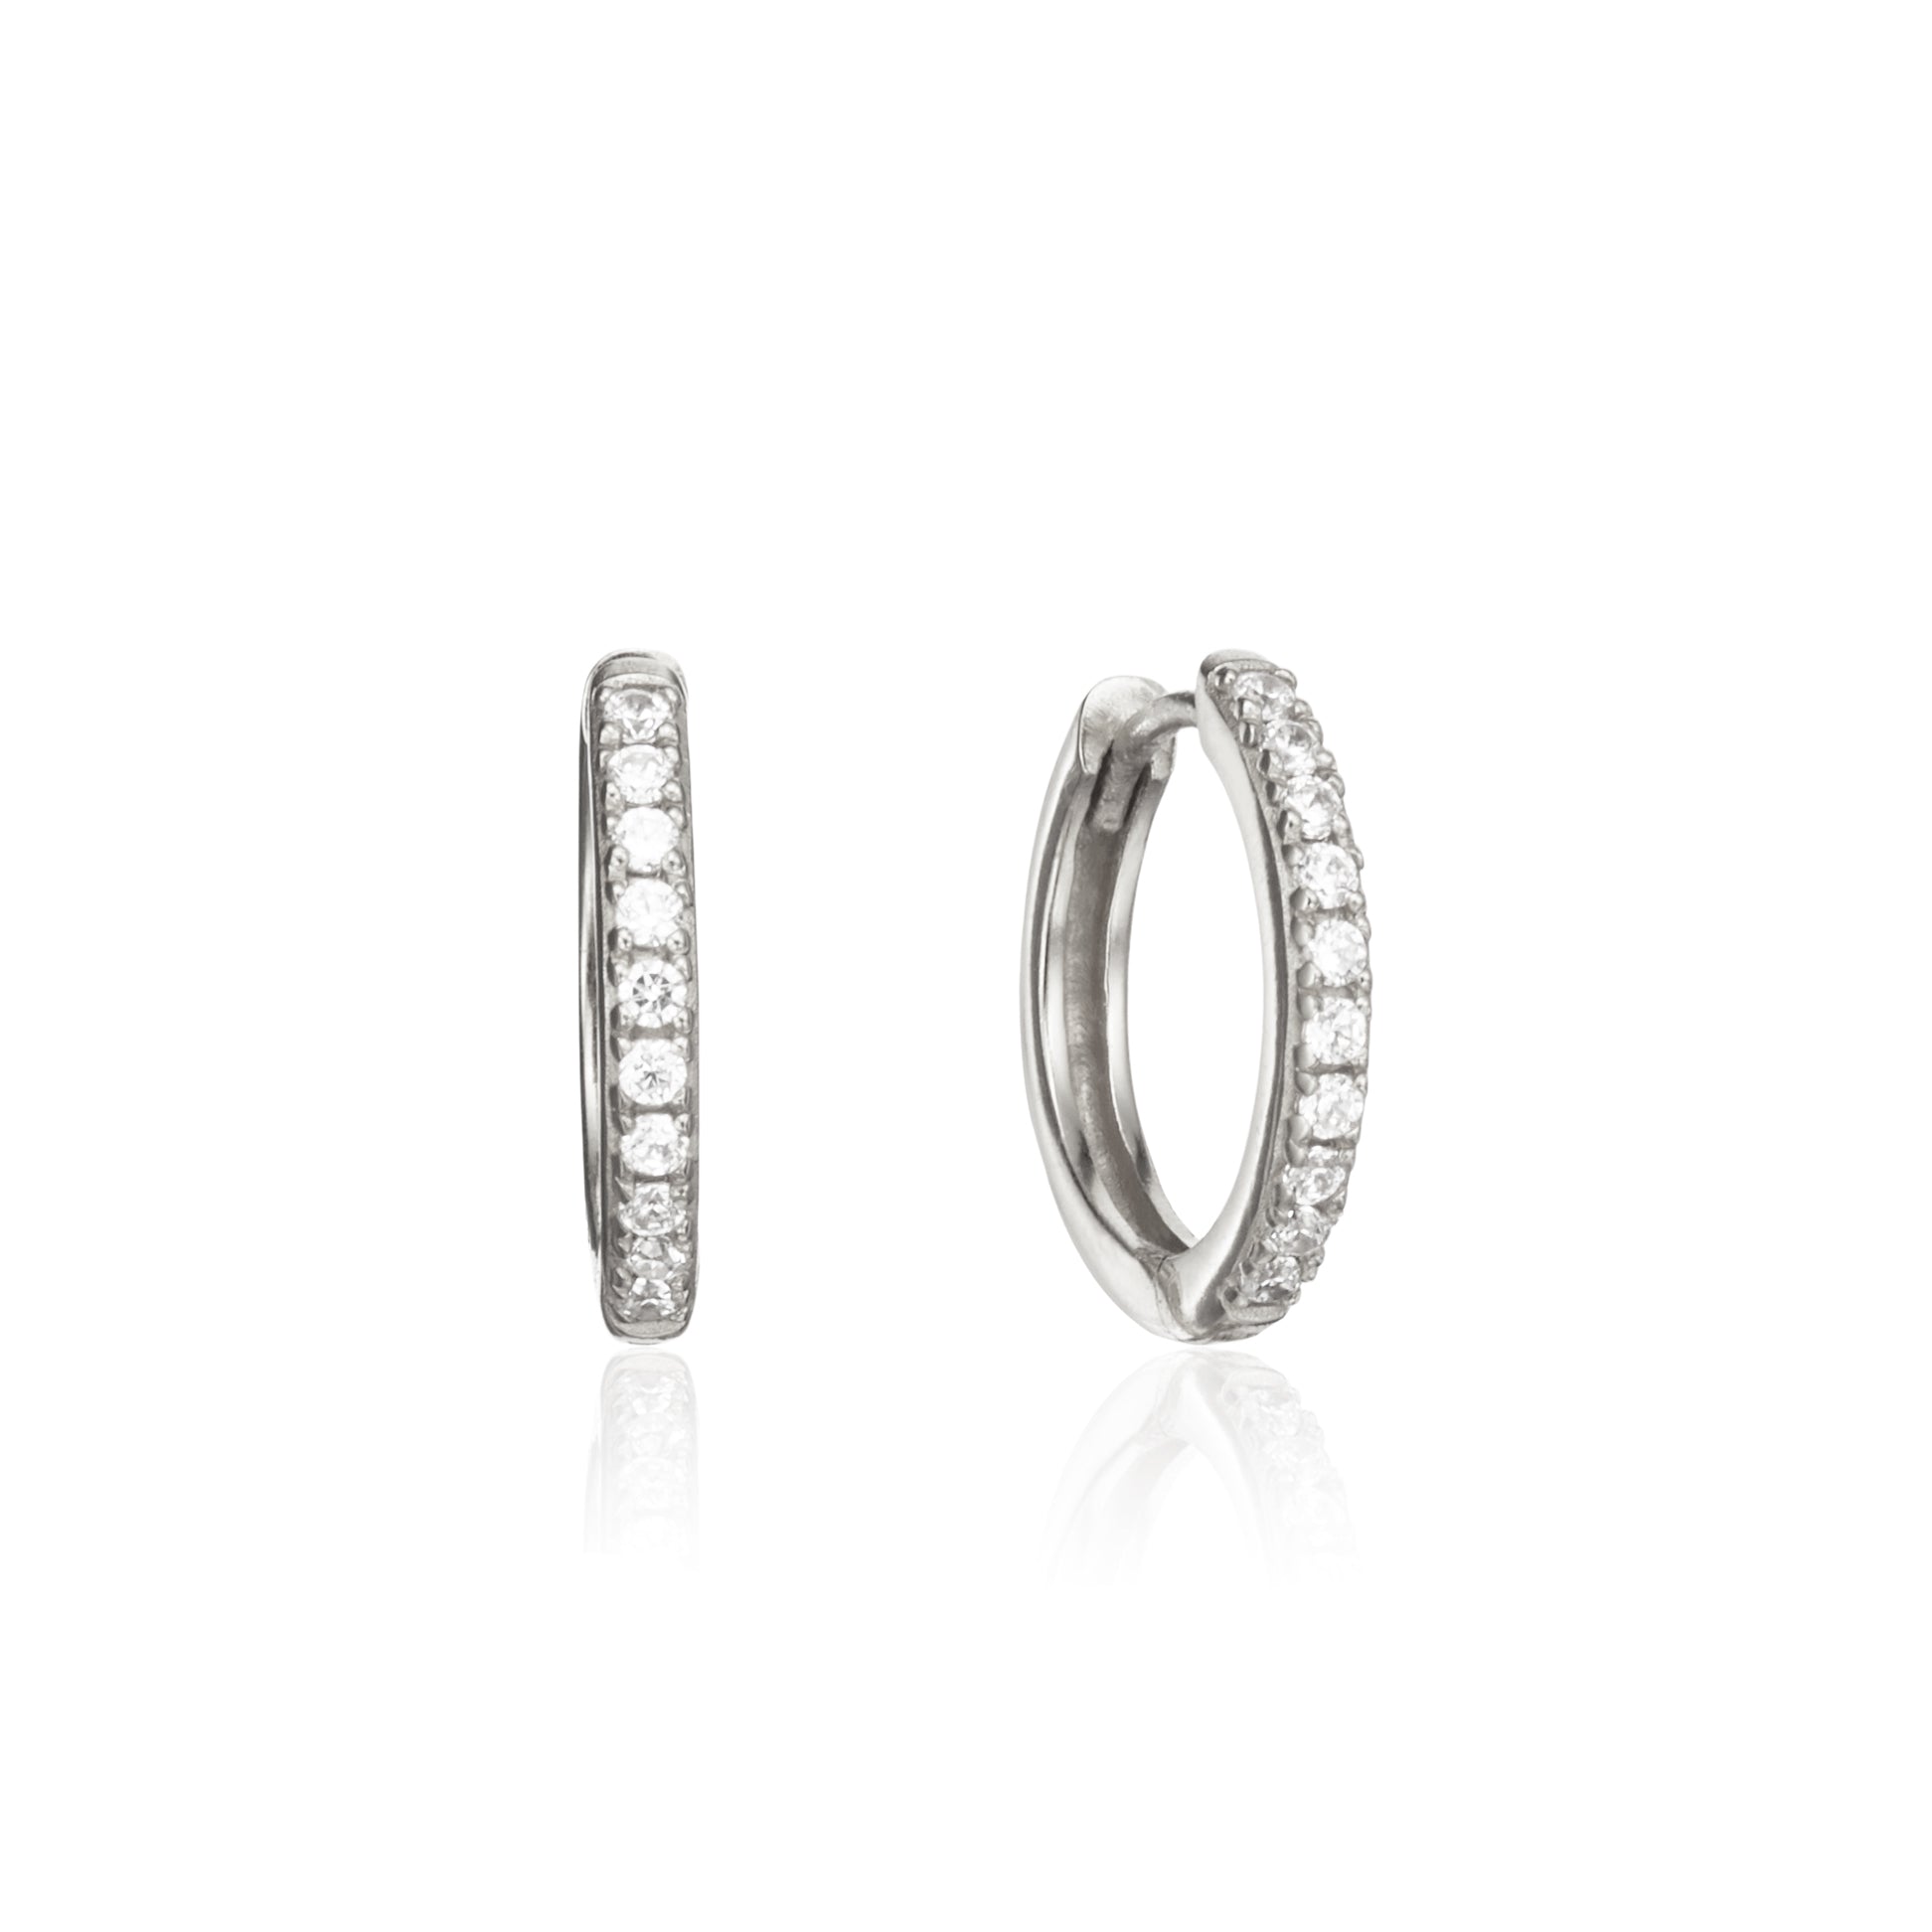 Silver diamond style large hoop earrings on a white background